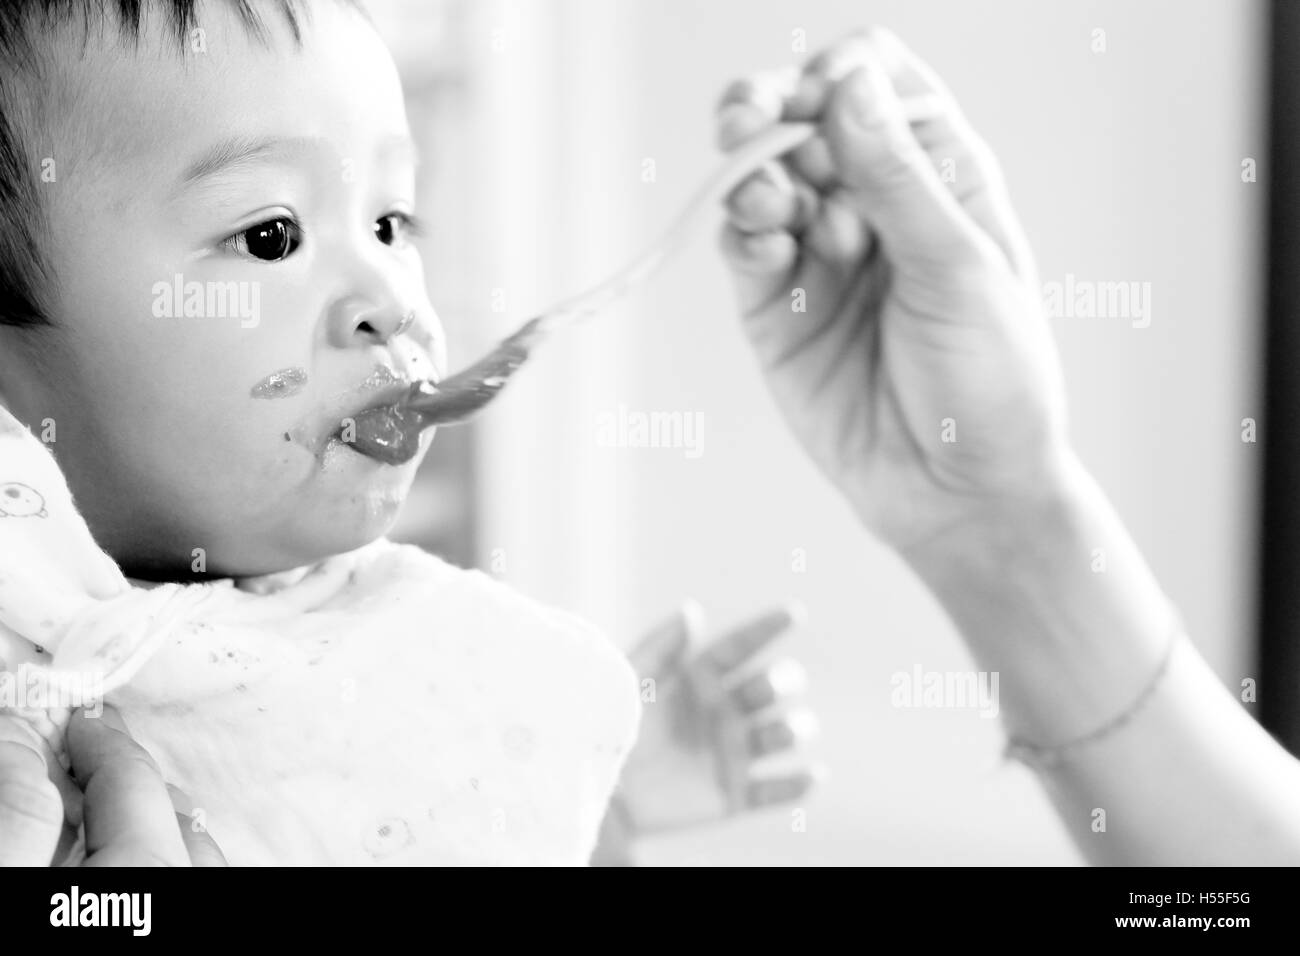 baby looking while feeding Eating Healthy Porridge Food, soft black and white color low key style. Stock Photo